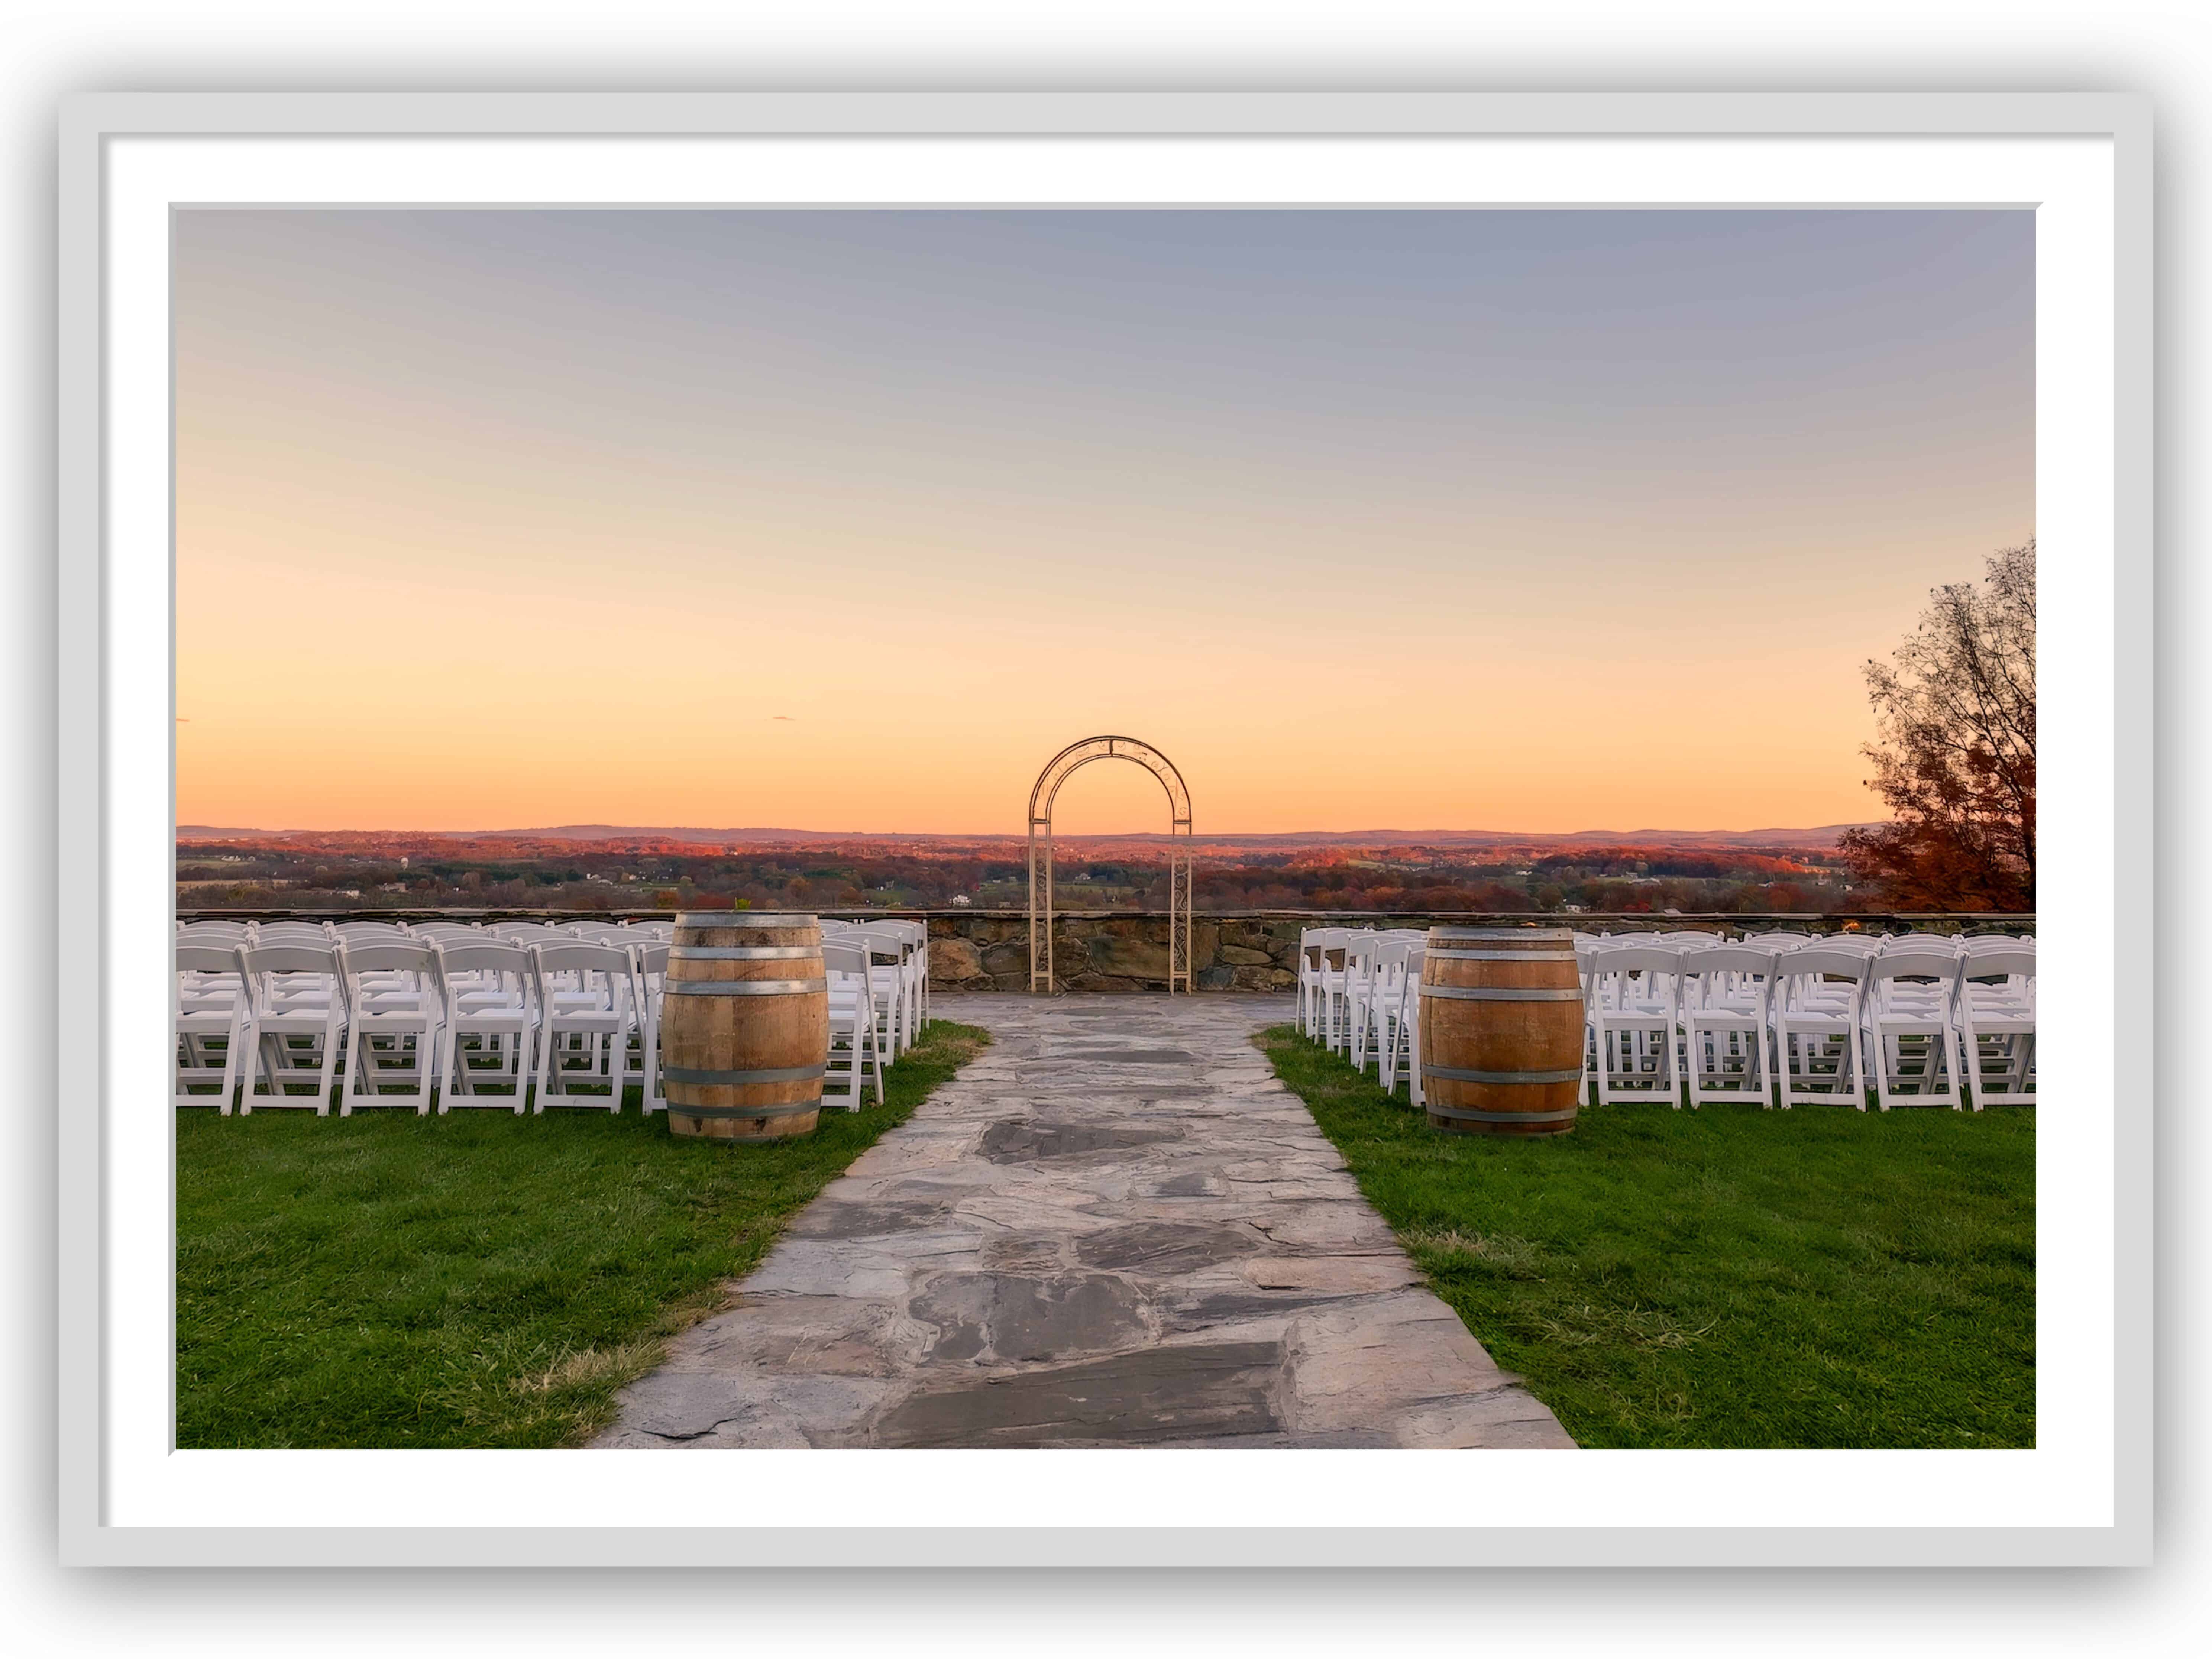 Framed-Elegant Outdoor Wedding Venue in Autumn | A stone pathway flanked by rows of white chairs and wine barrels leads to a romantic wedding arch overlooking a scenic landscape with an autumn sunset.